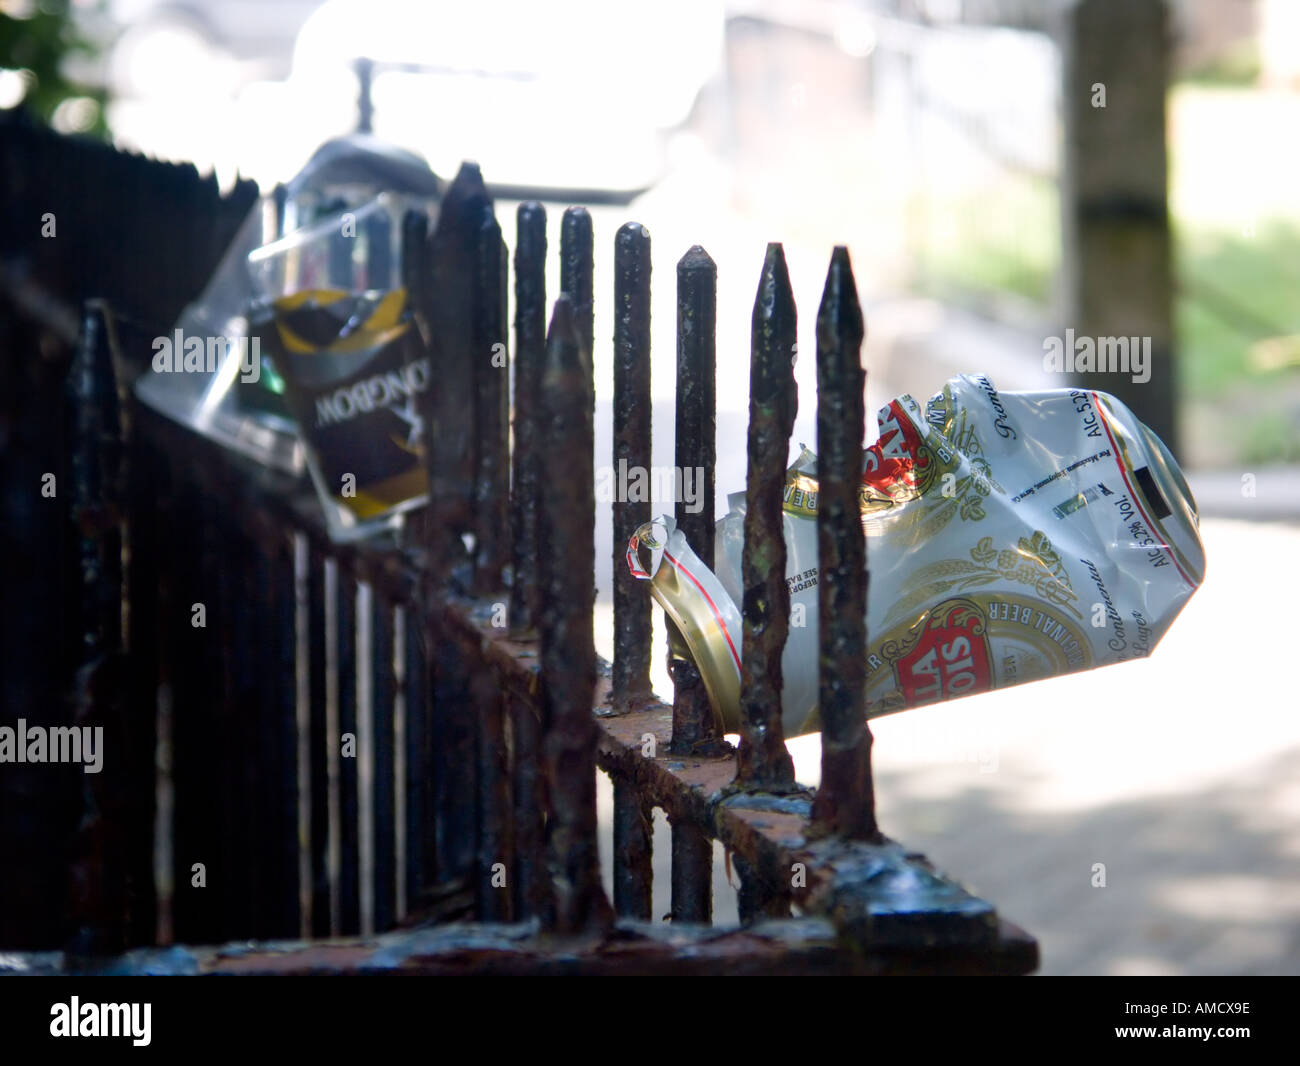 Beer can impaled on railings Stock Photo